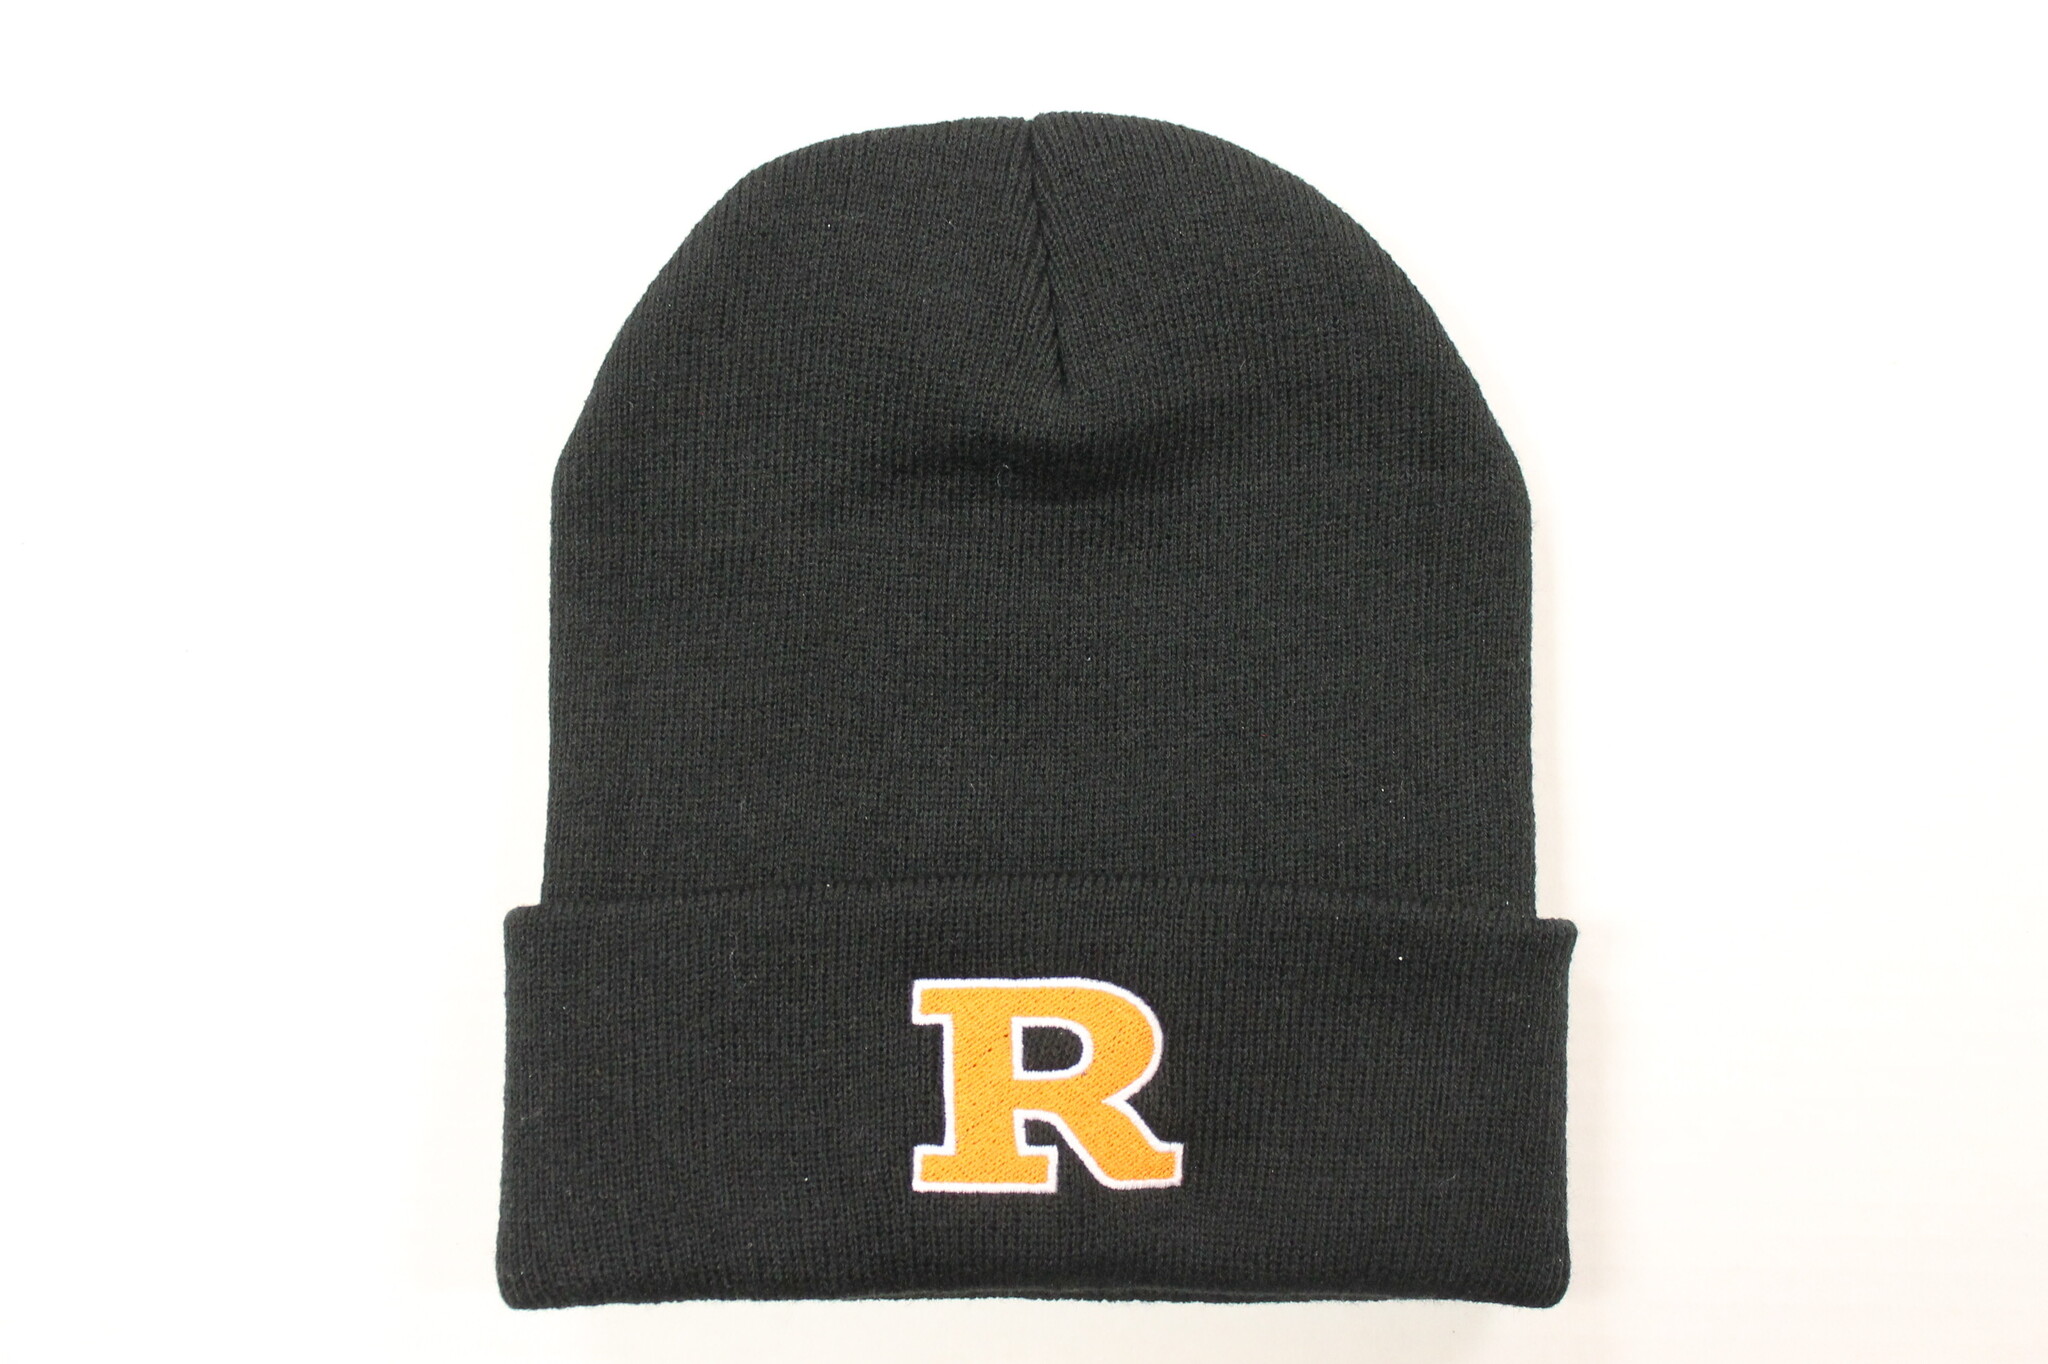 Black Beanie - Embroidered R - Ridley College's Campus Store